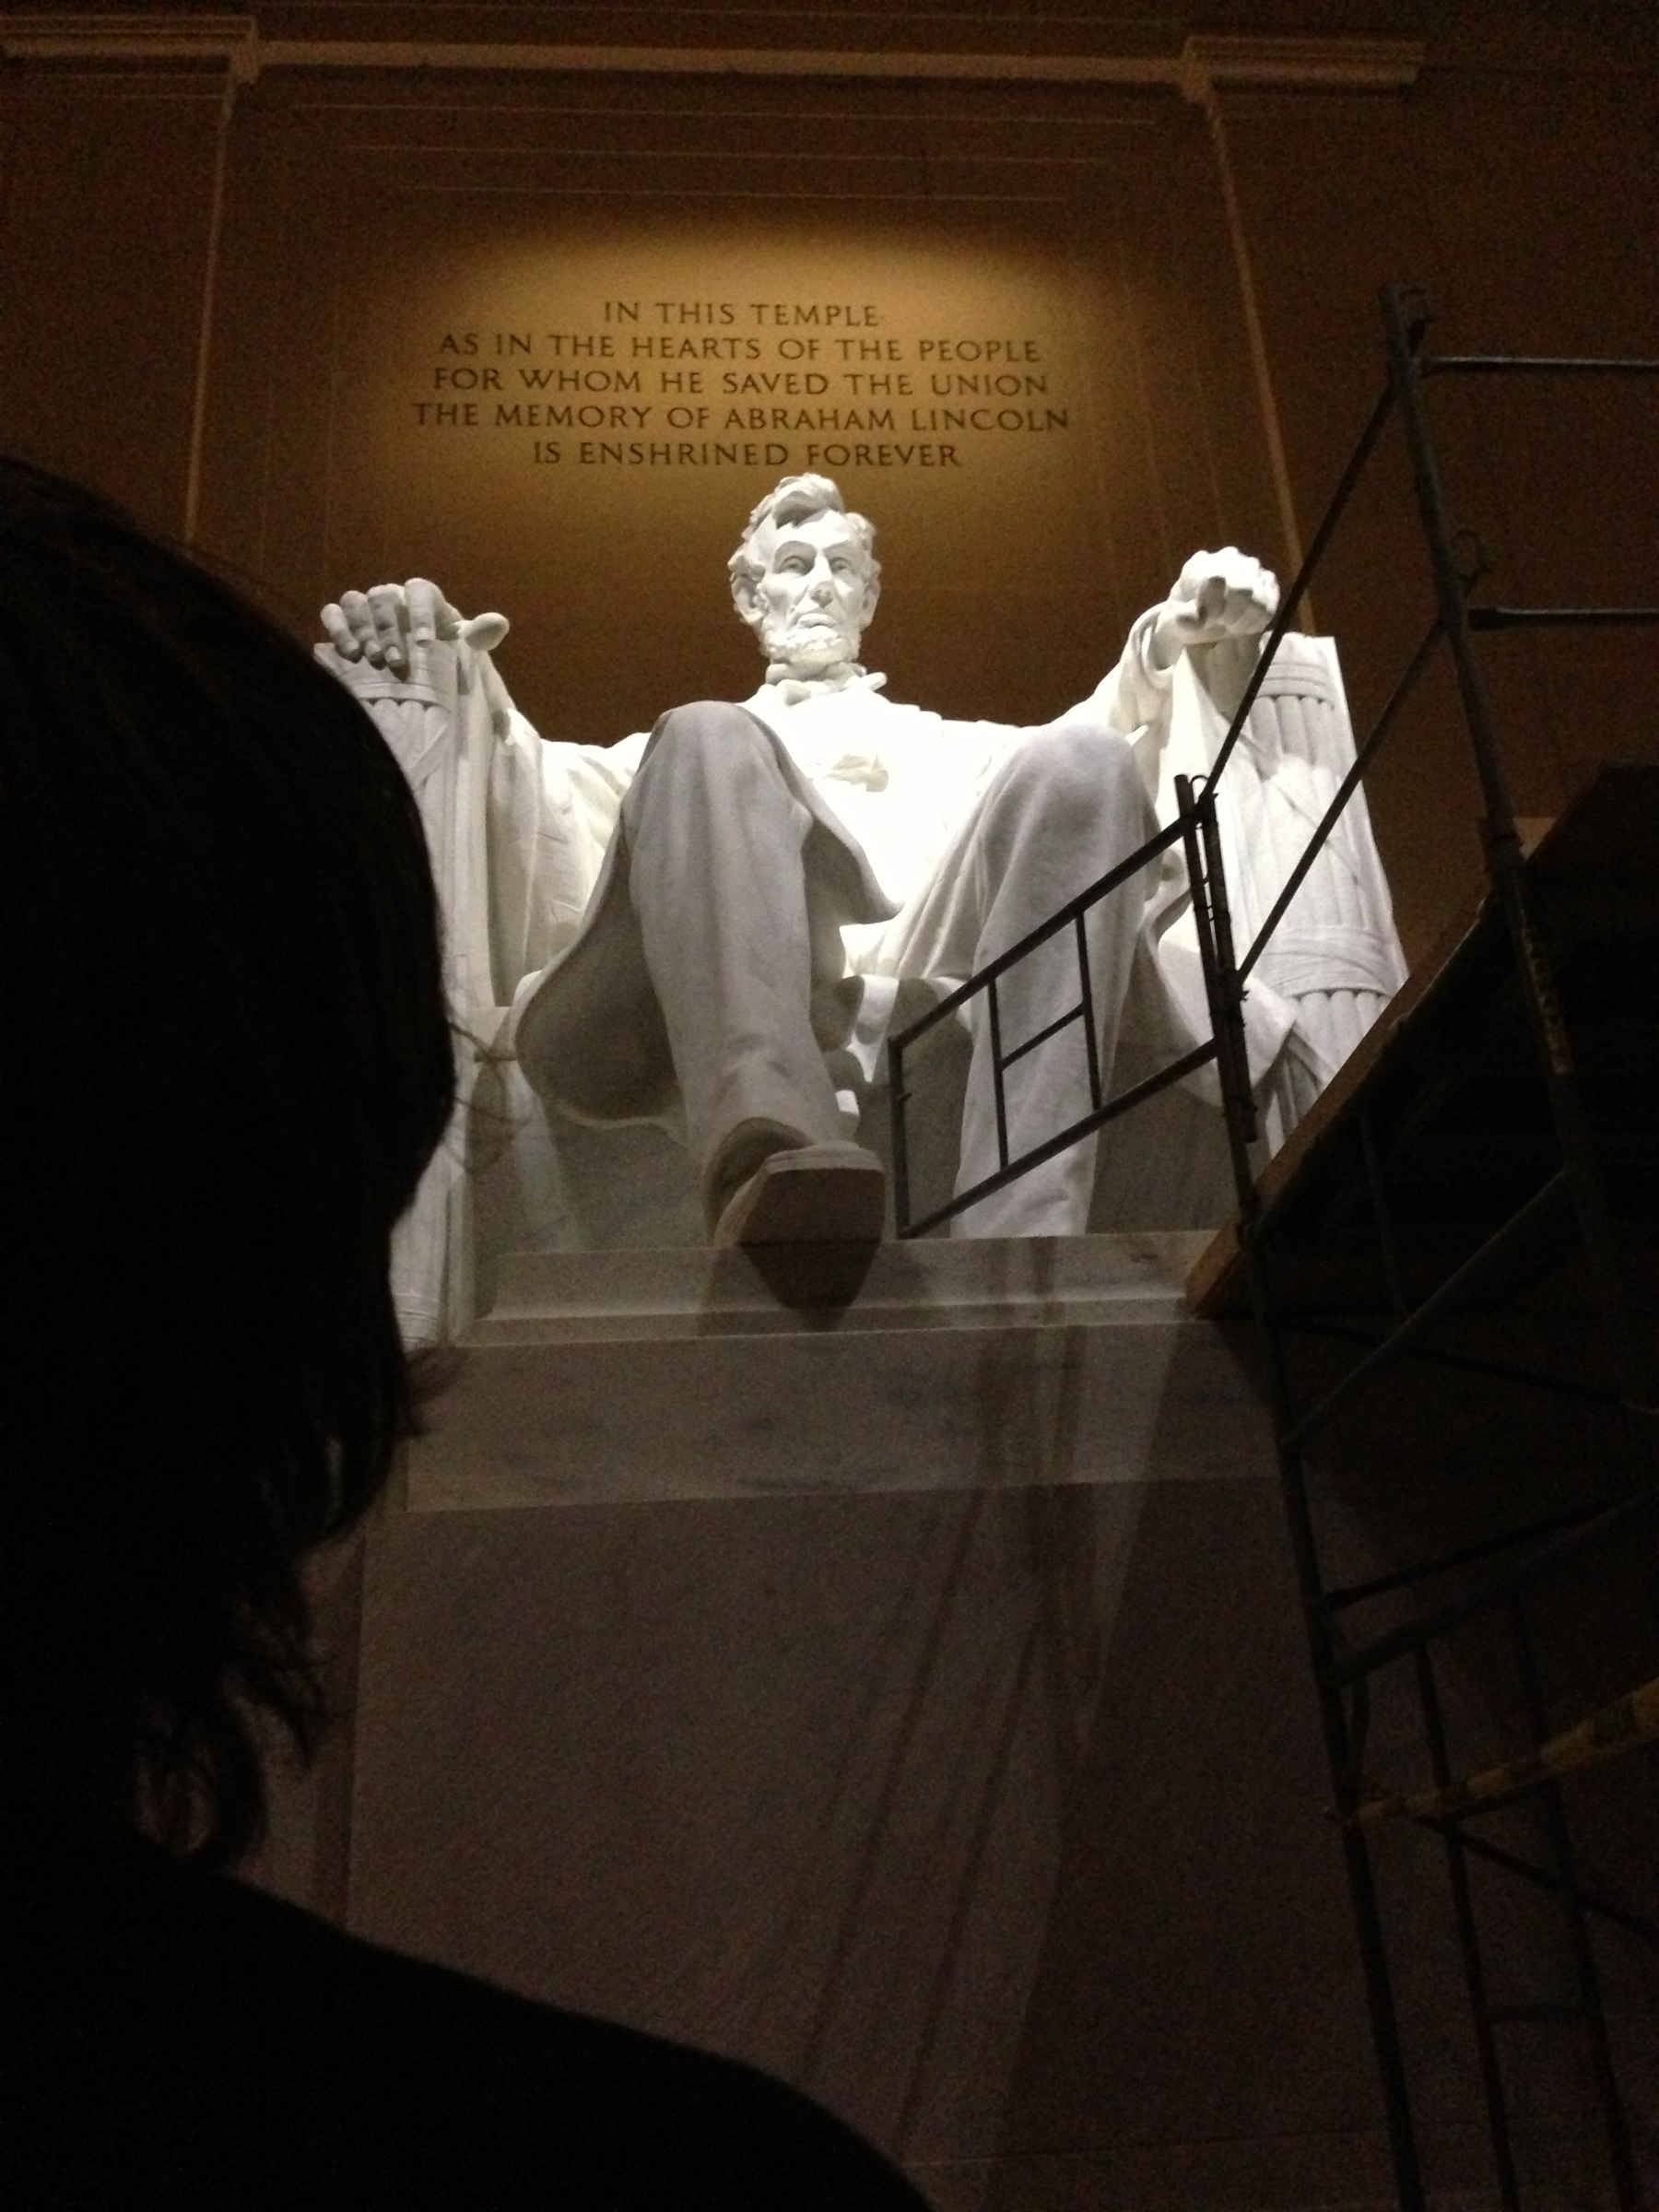 Looking up at the Lincoln Memorial